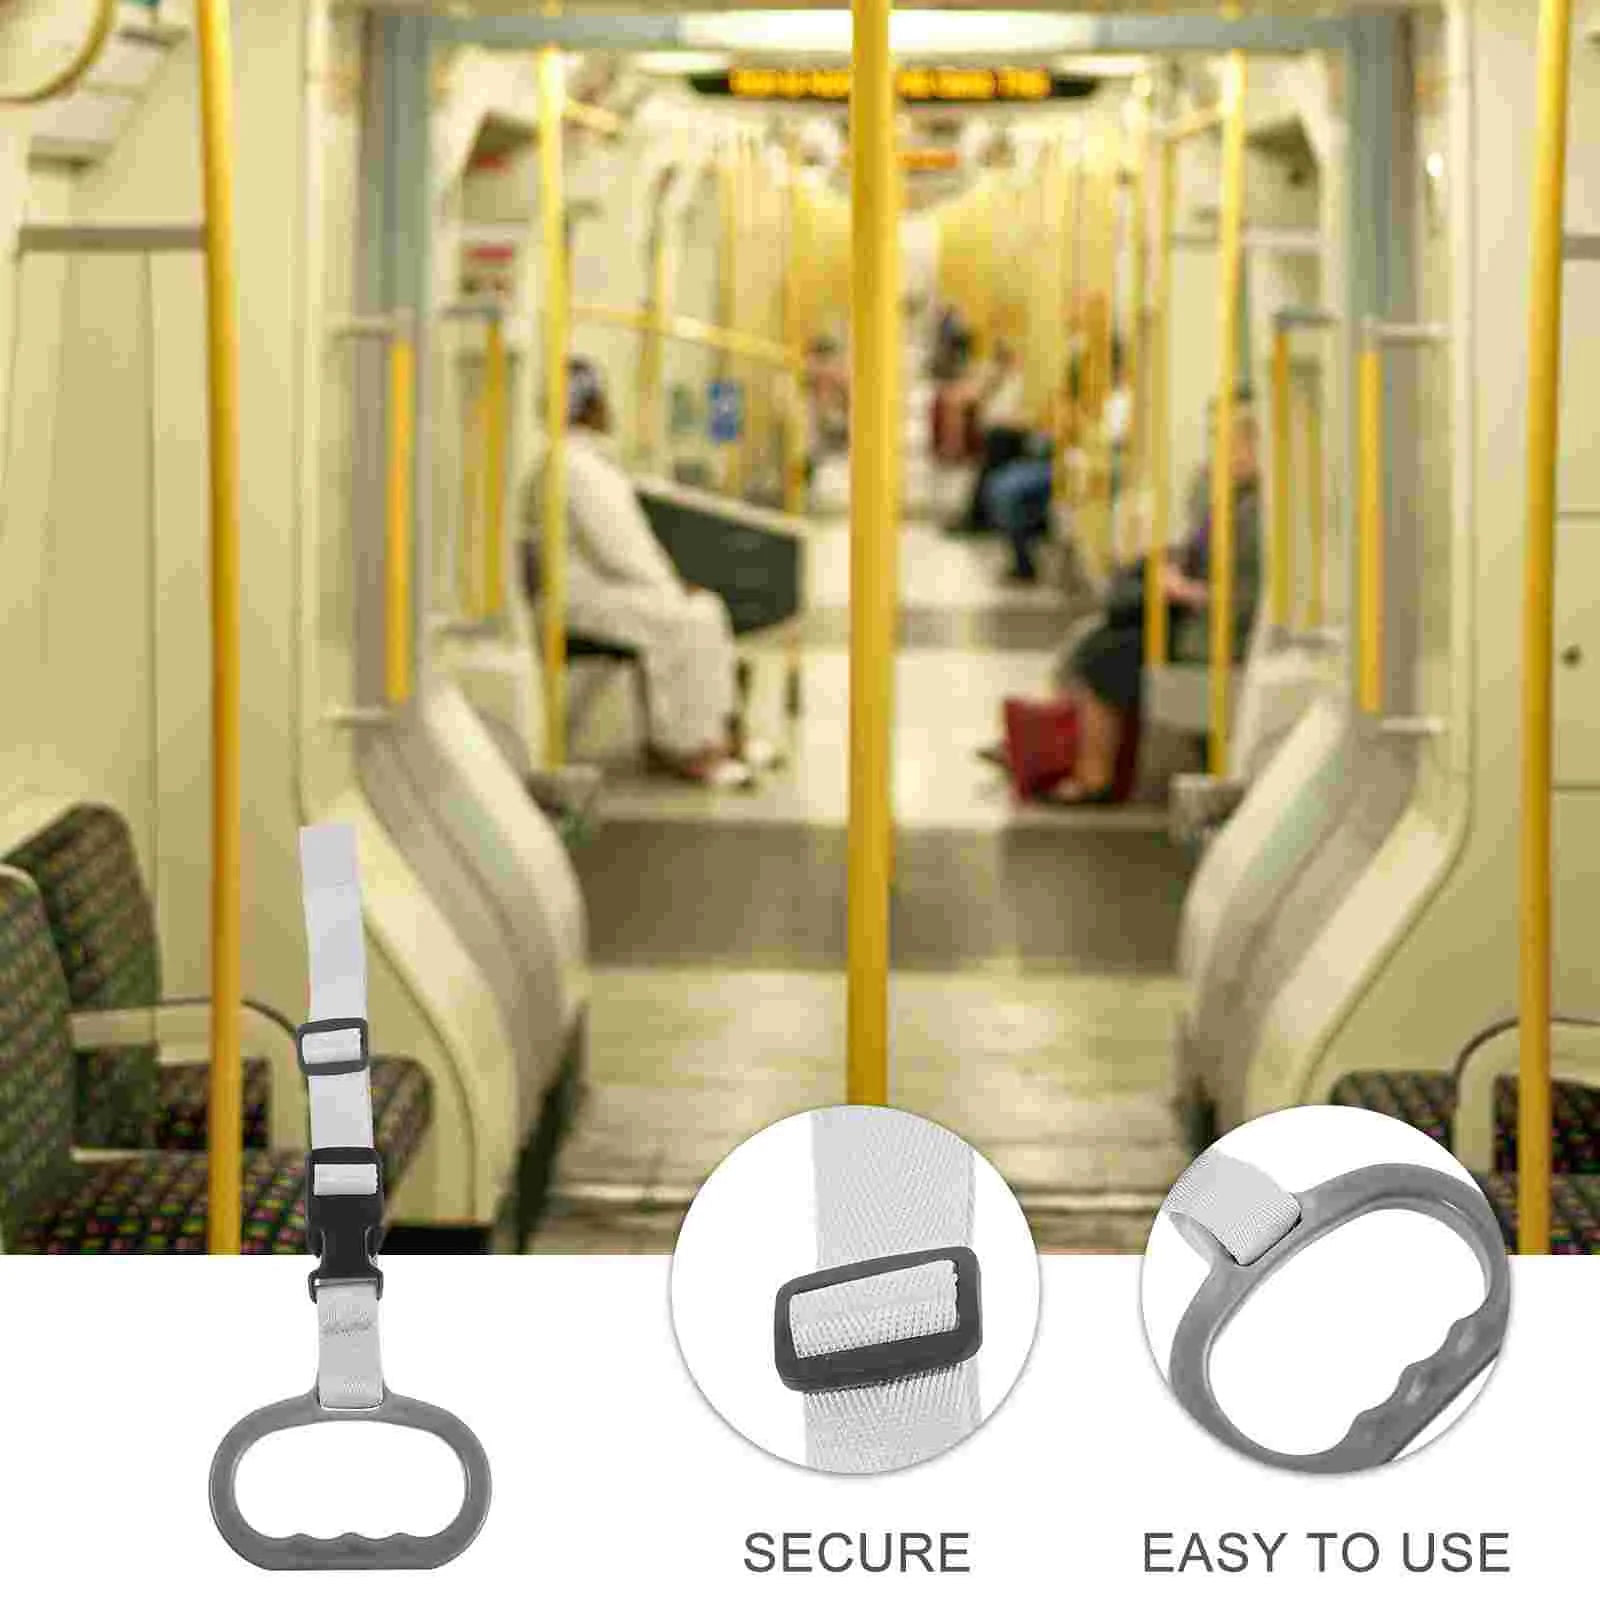 Car Assistive Device: Door Handle Strap for Mobility Aid and Elderly Assistance